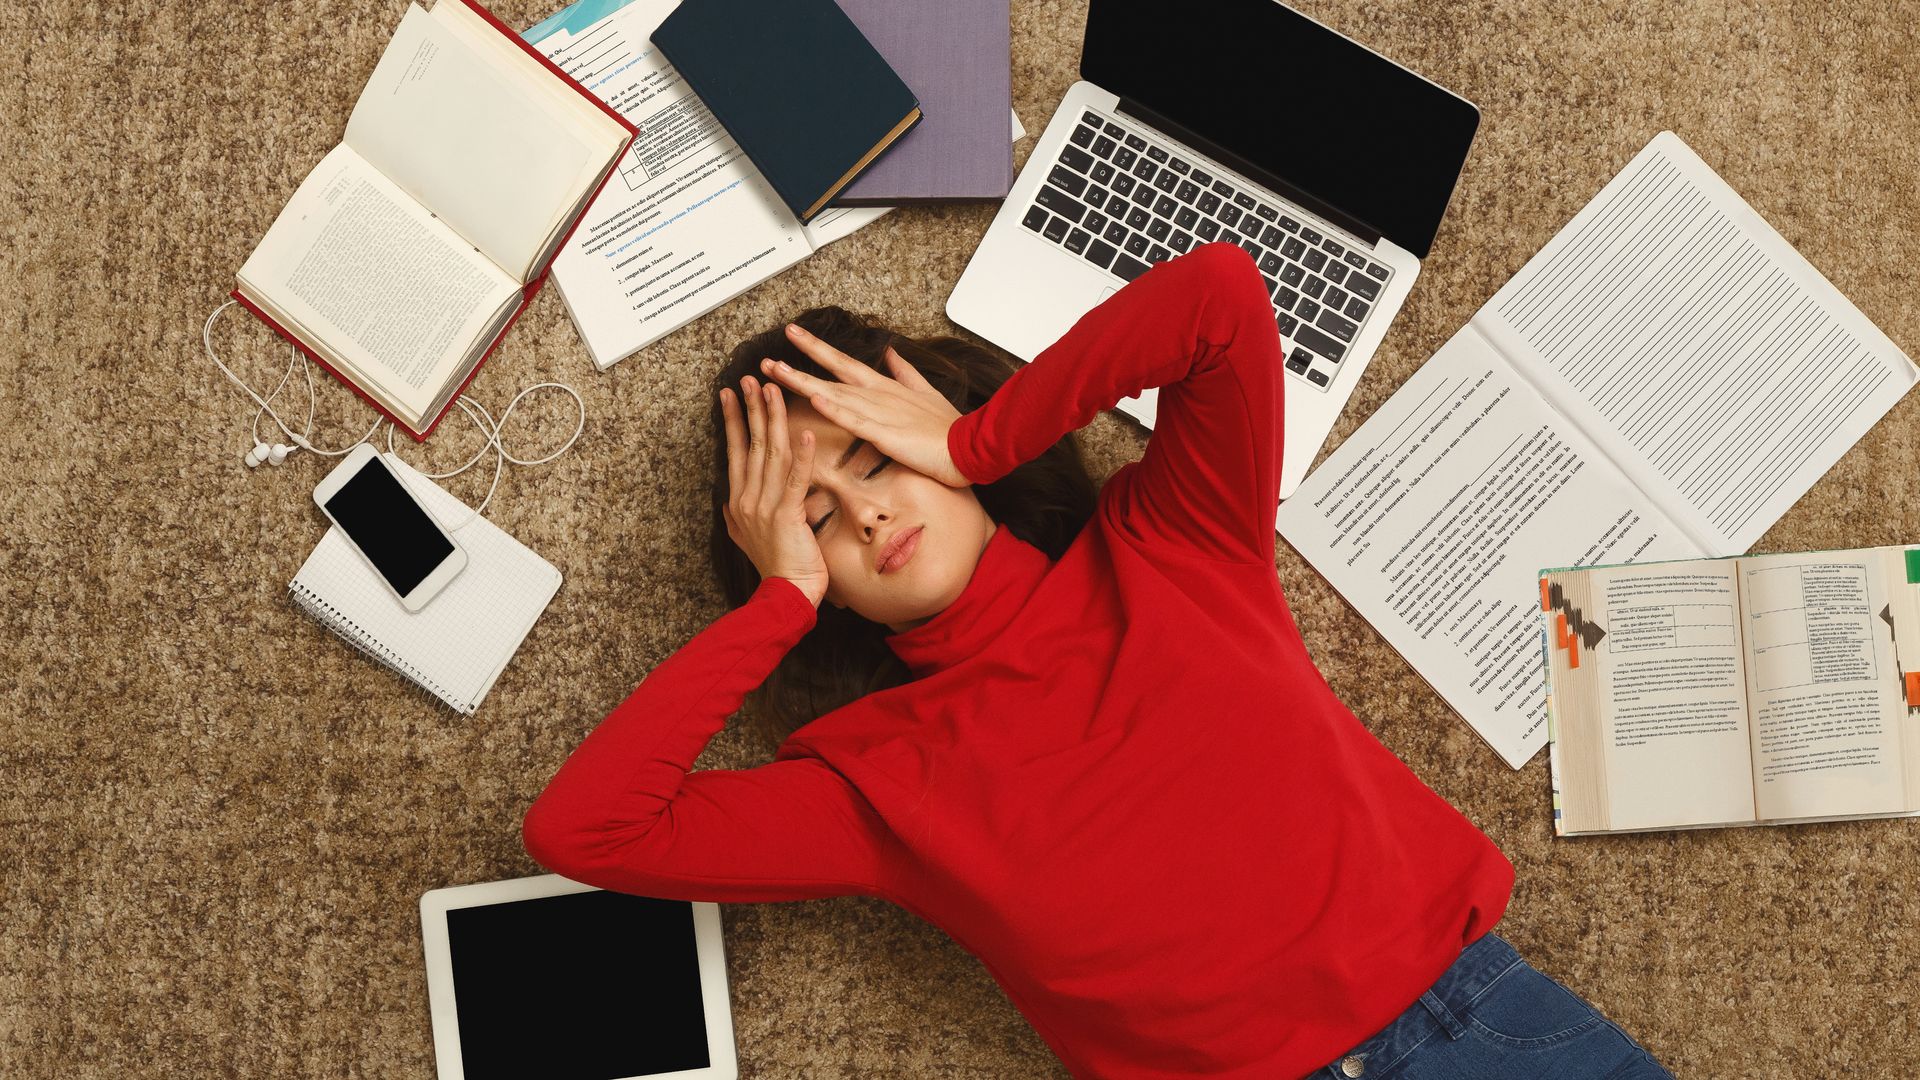 Exhausted student lying on the floor among textbooks and tests